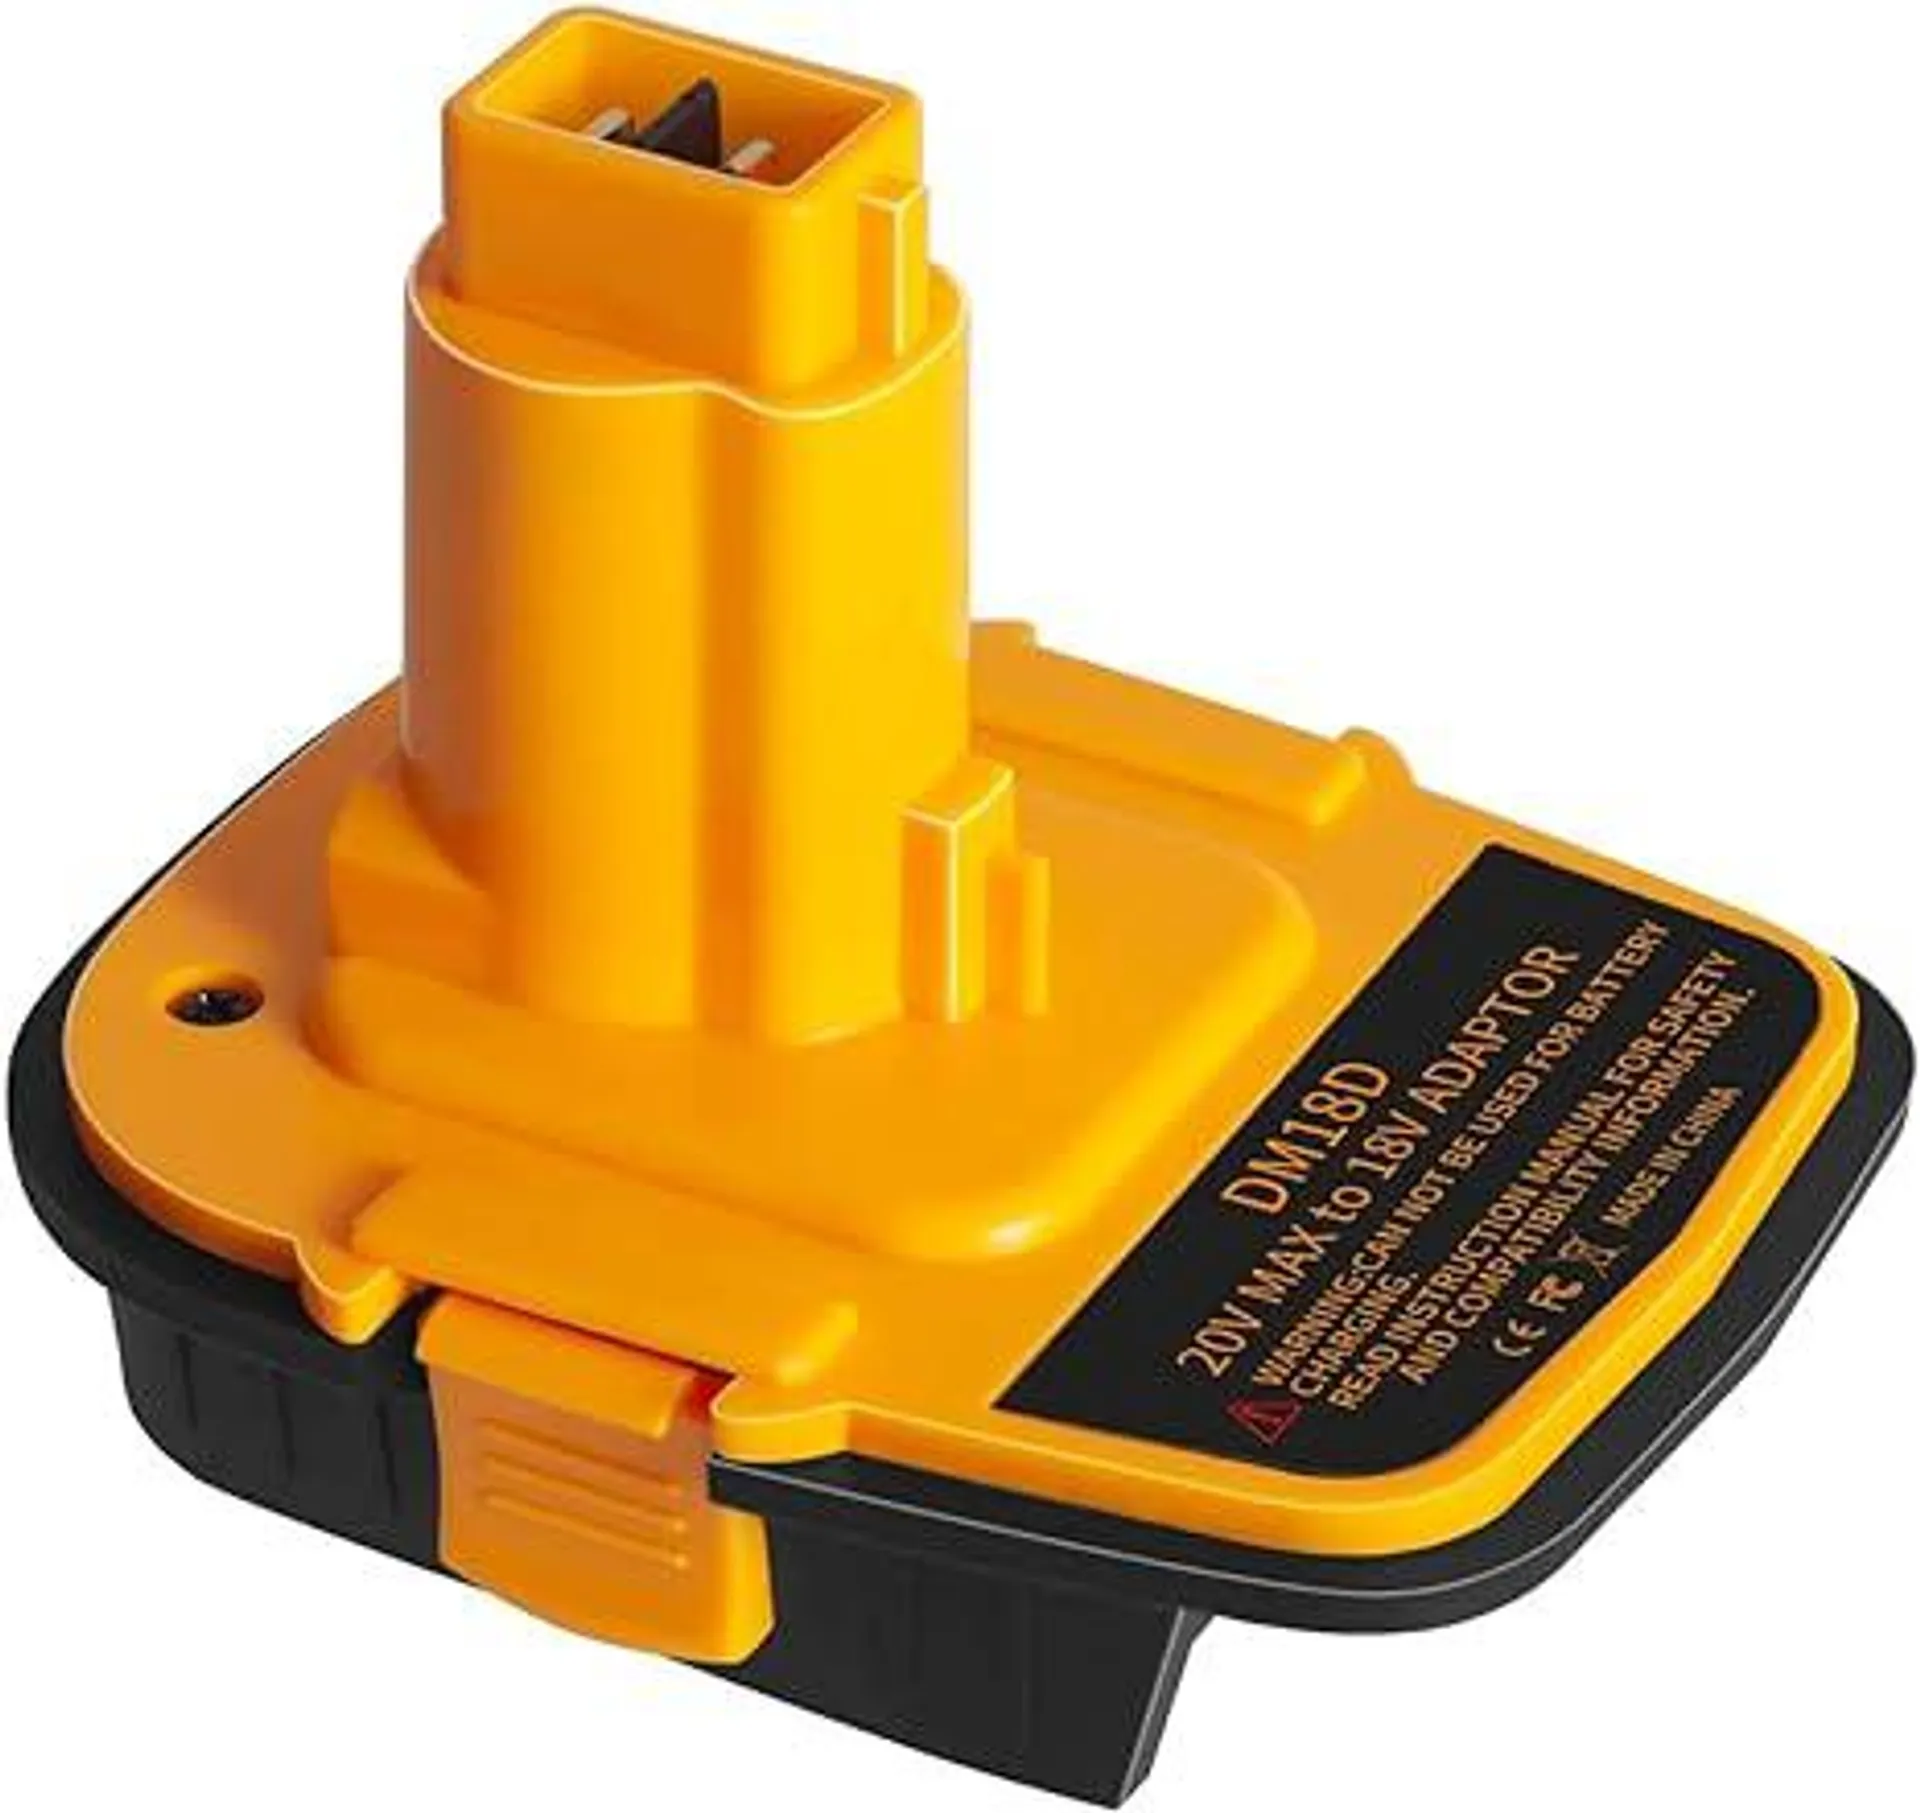 Battery Adapter DM18D with USB,Compatible with Dewalt 18V Tools.Convert for DeWalt 20V & for Milwaukee M18 Lithium Battery to NiCad & NiMh Battery Tools (1 Pack)